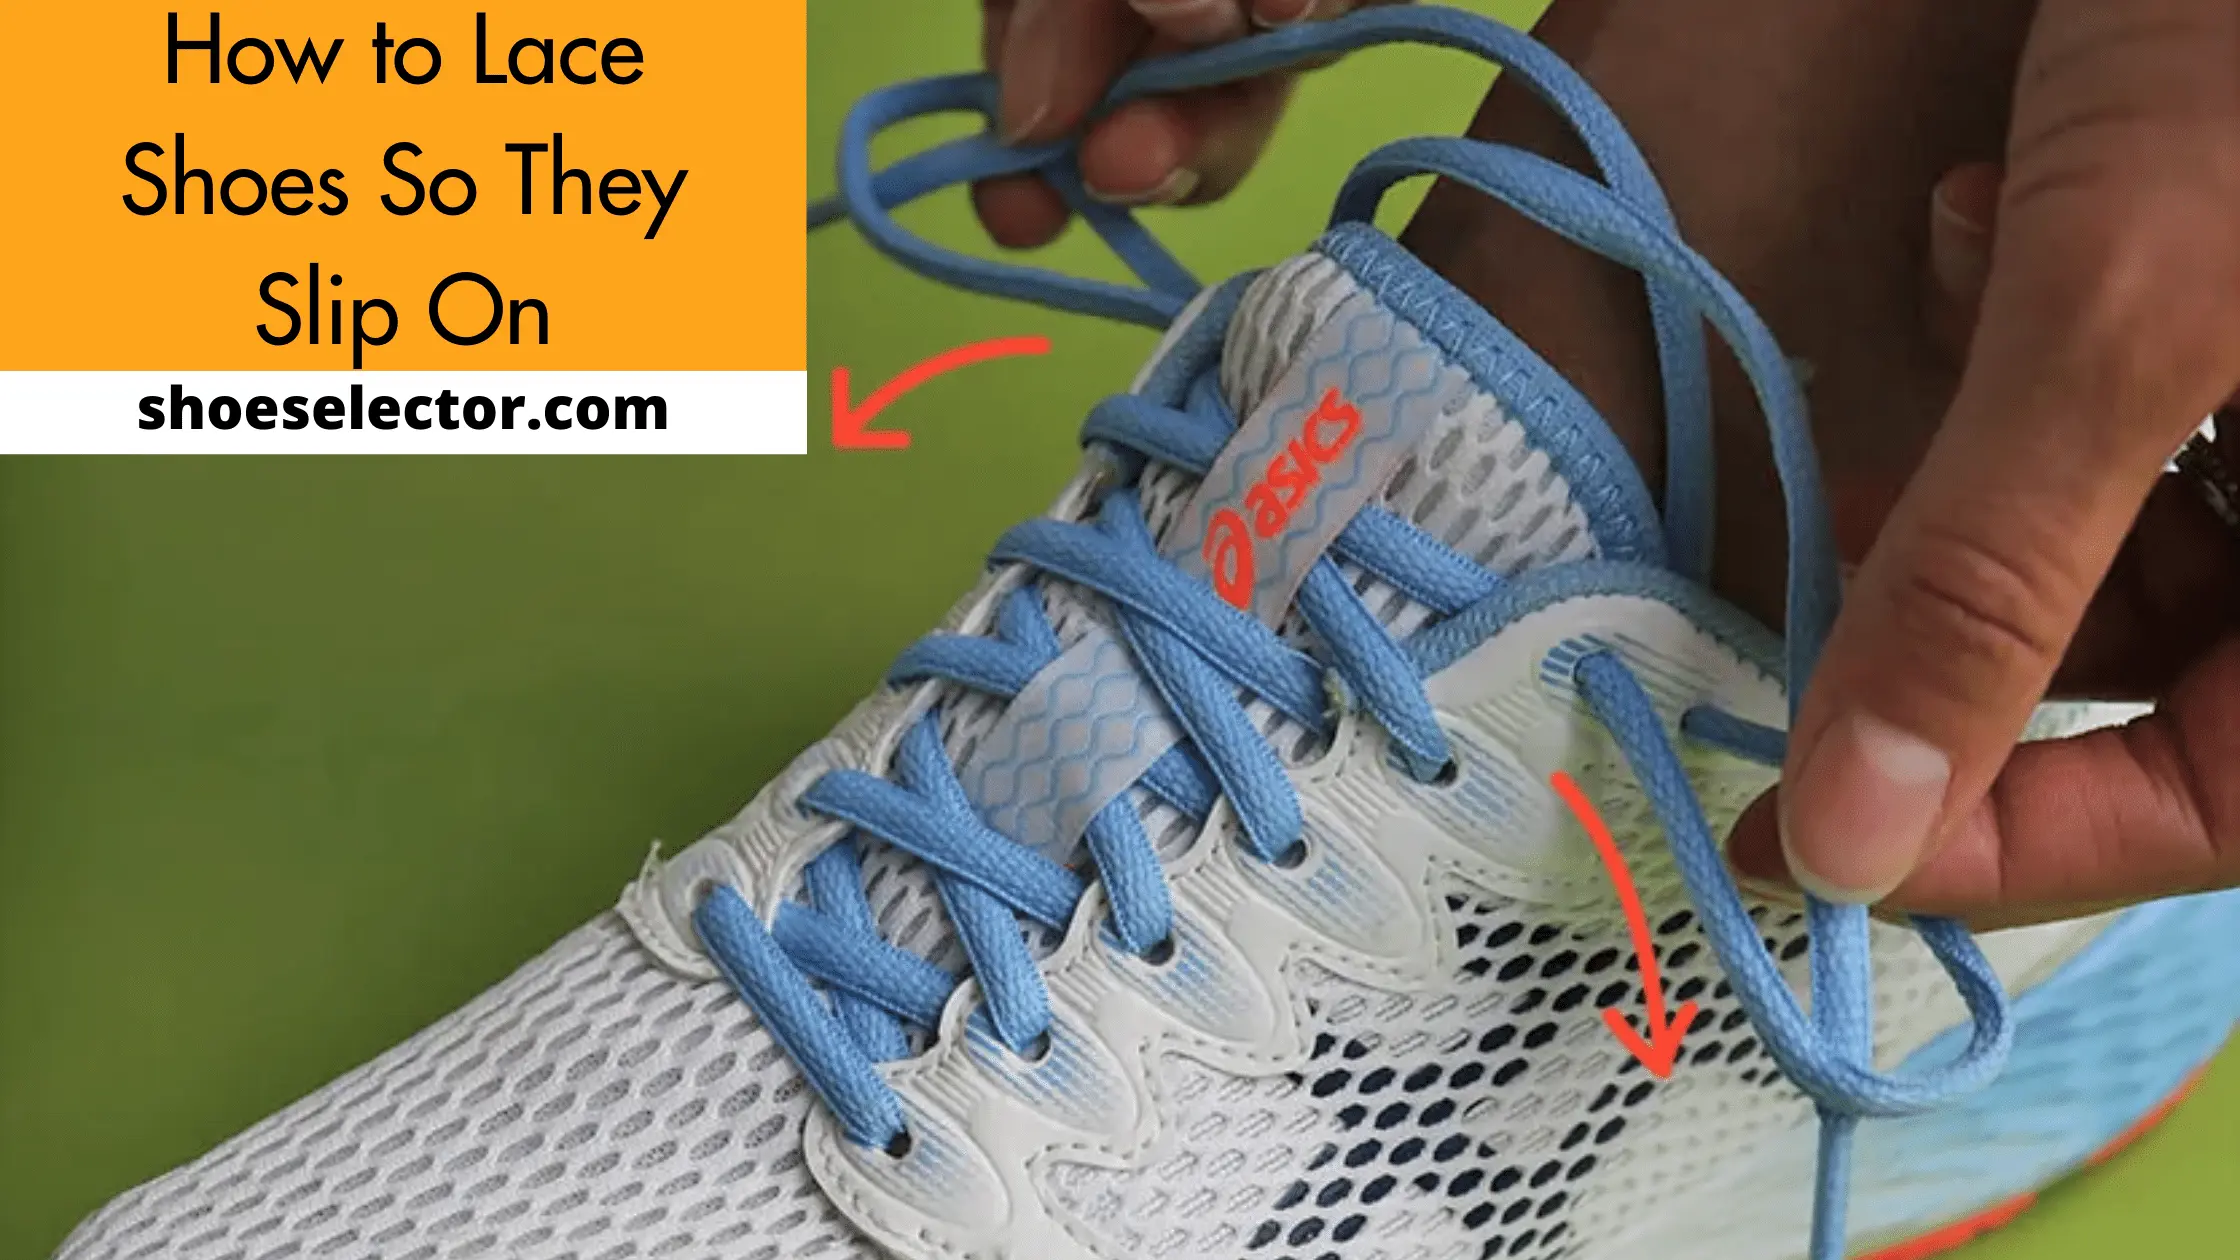 How to Lace Shoes So They Slip On? - Simple Guide